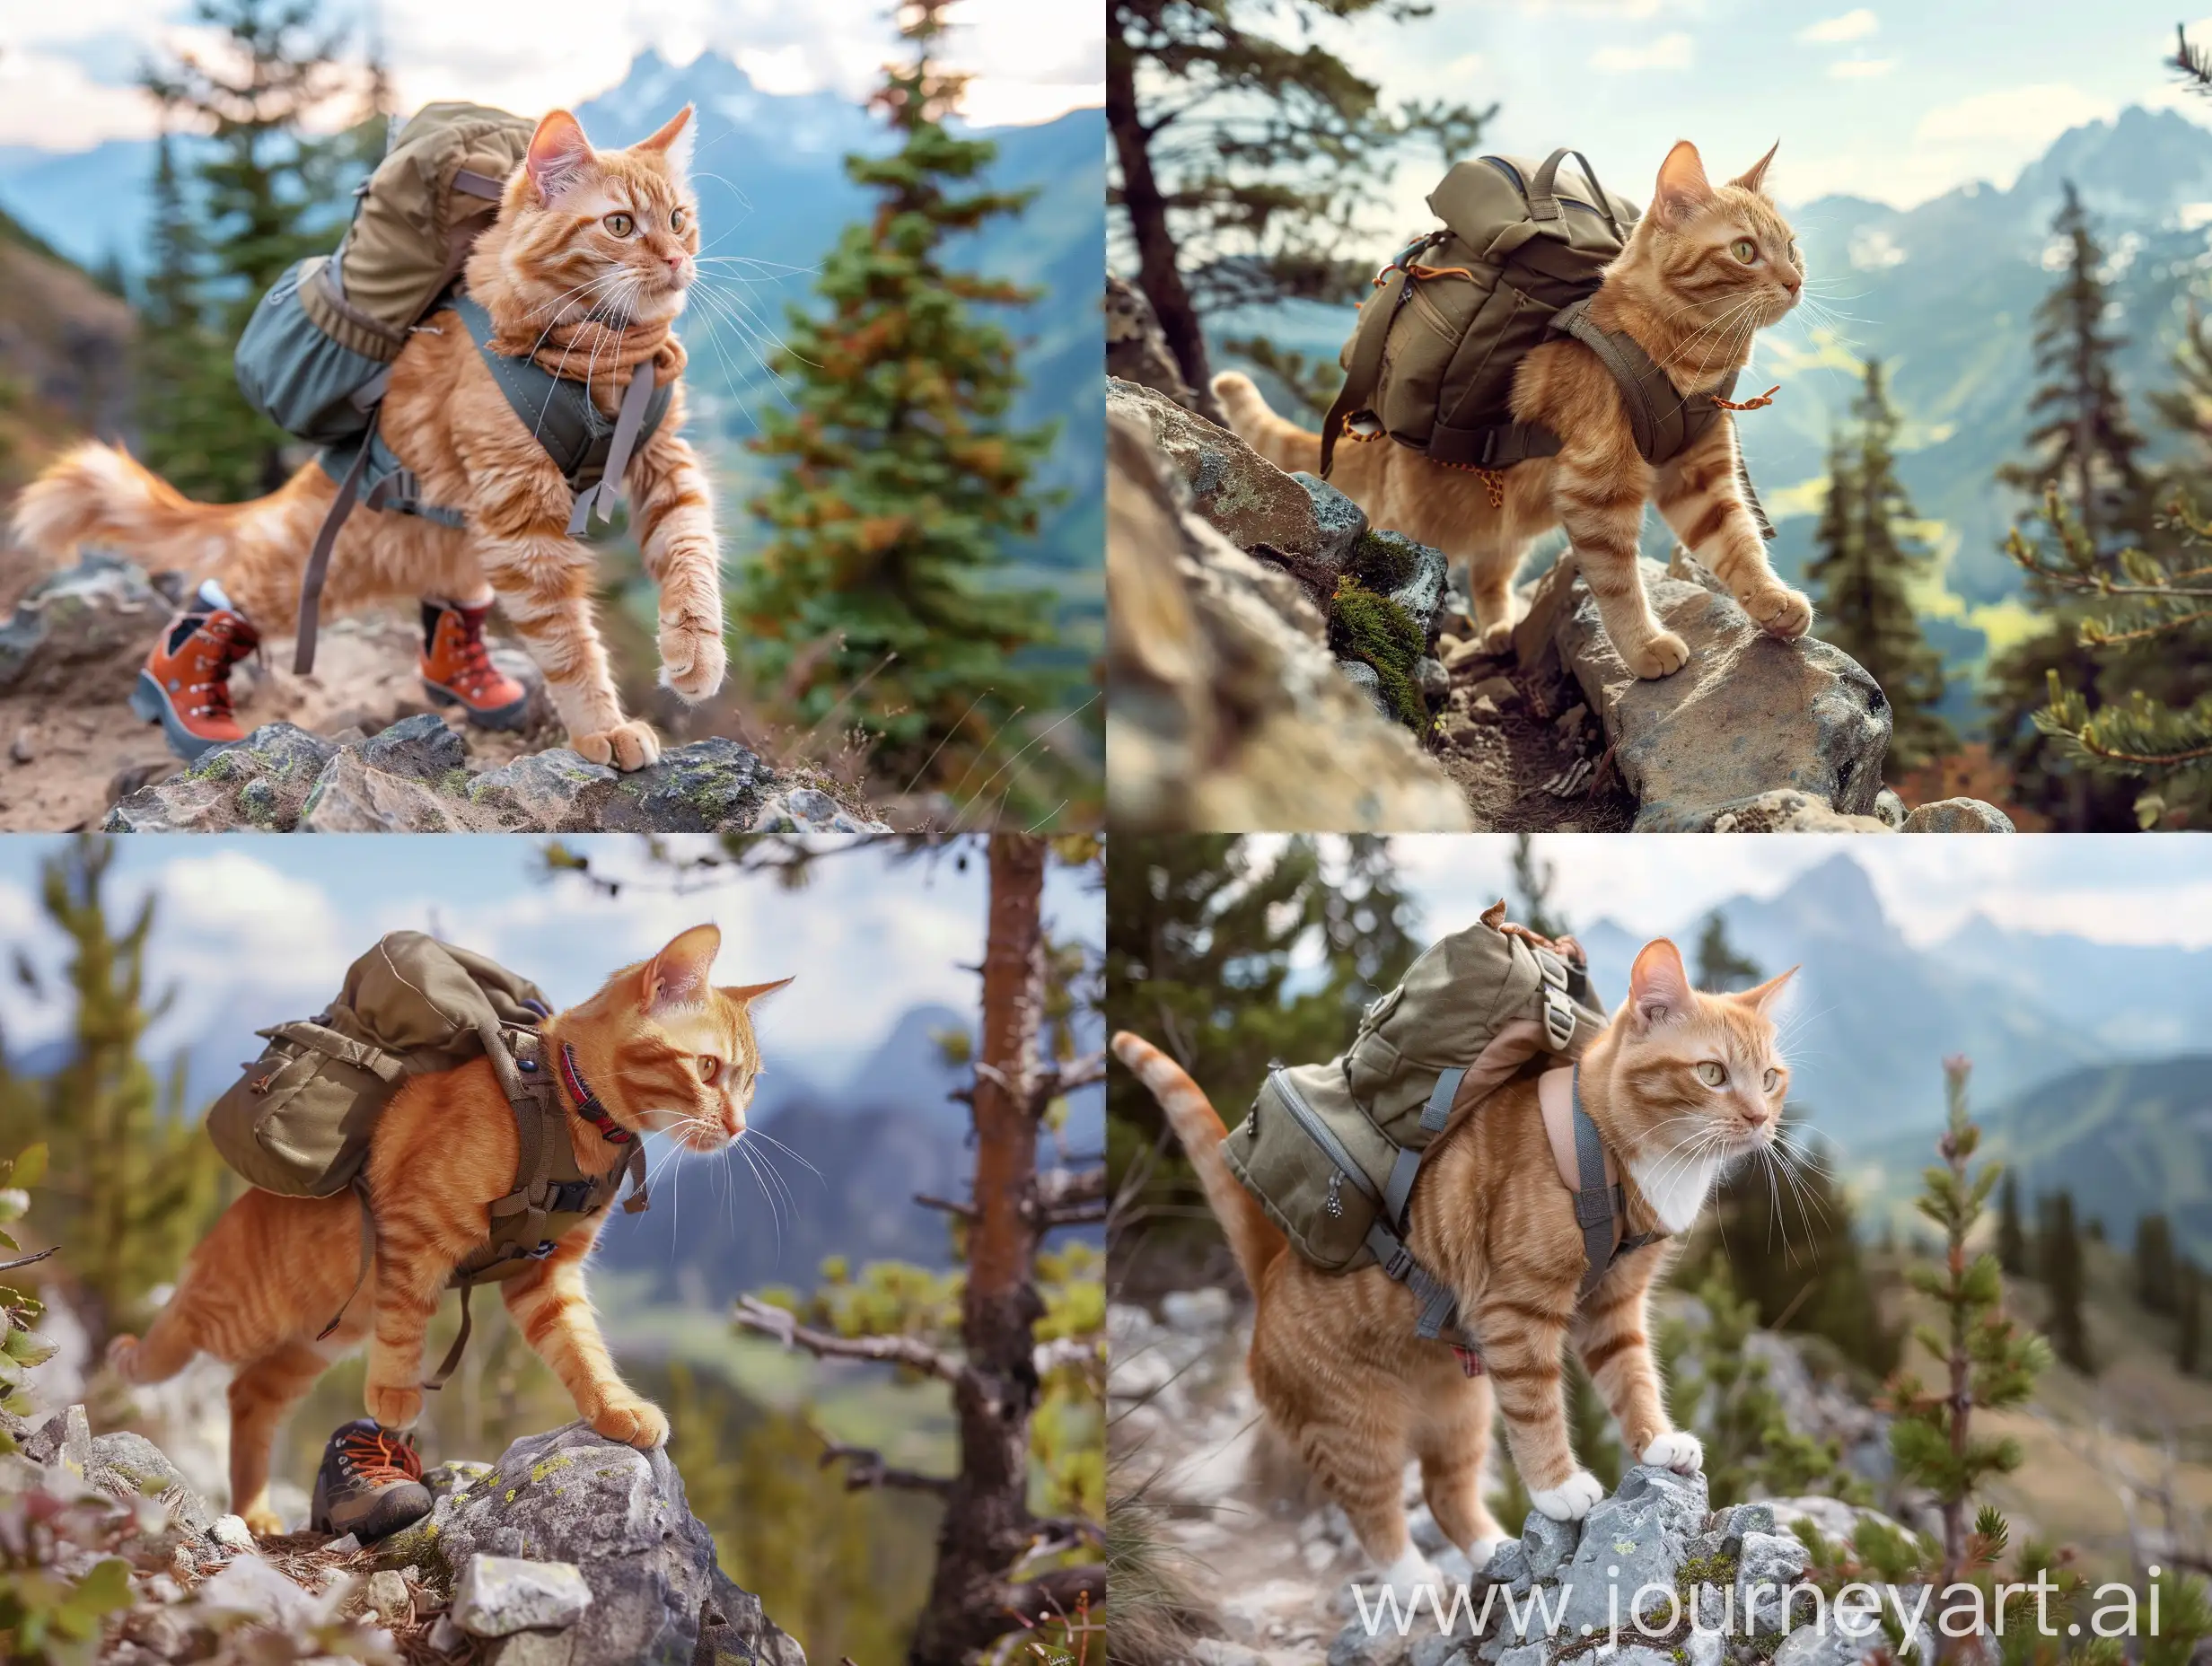 Adventure-Cat-Hiking-Mountain-Trail-with-Backpack-and-Boots